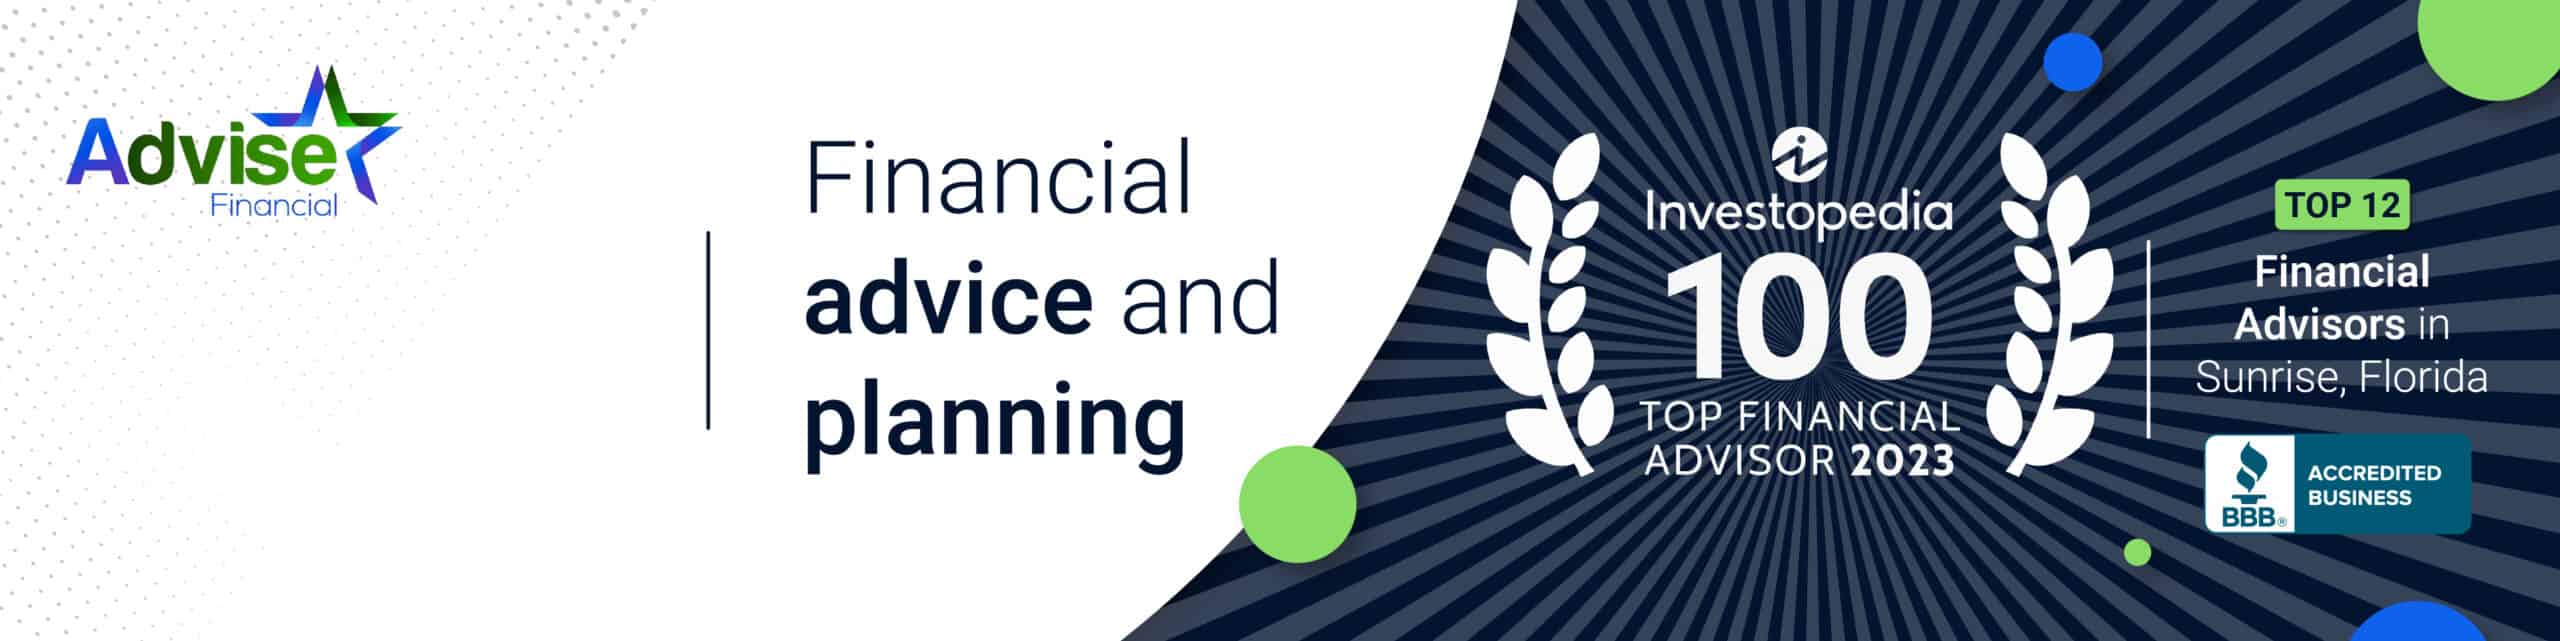 Professional accolades in the financial sector: featuring top financial advisor recognition and a stamp of accreditation for trusted financial advice and planning services.